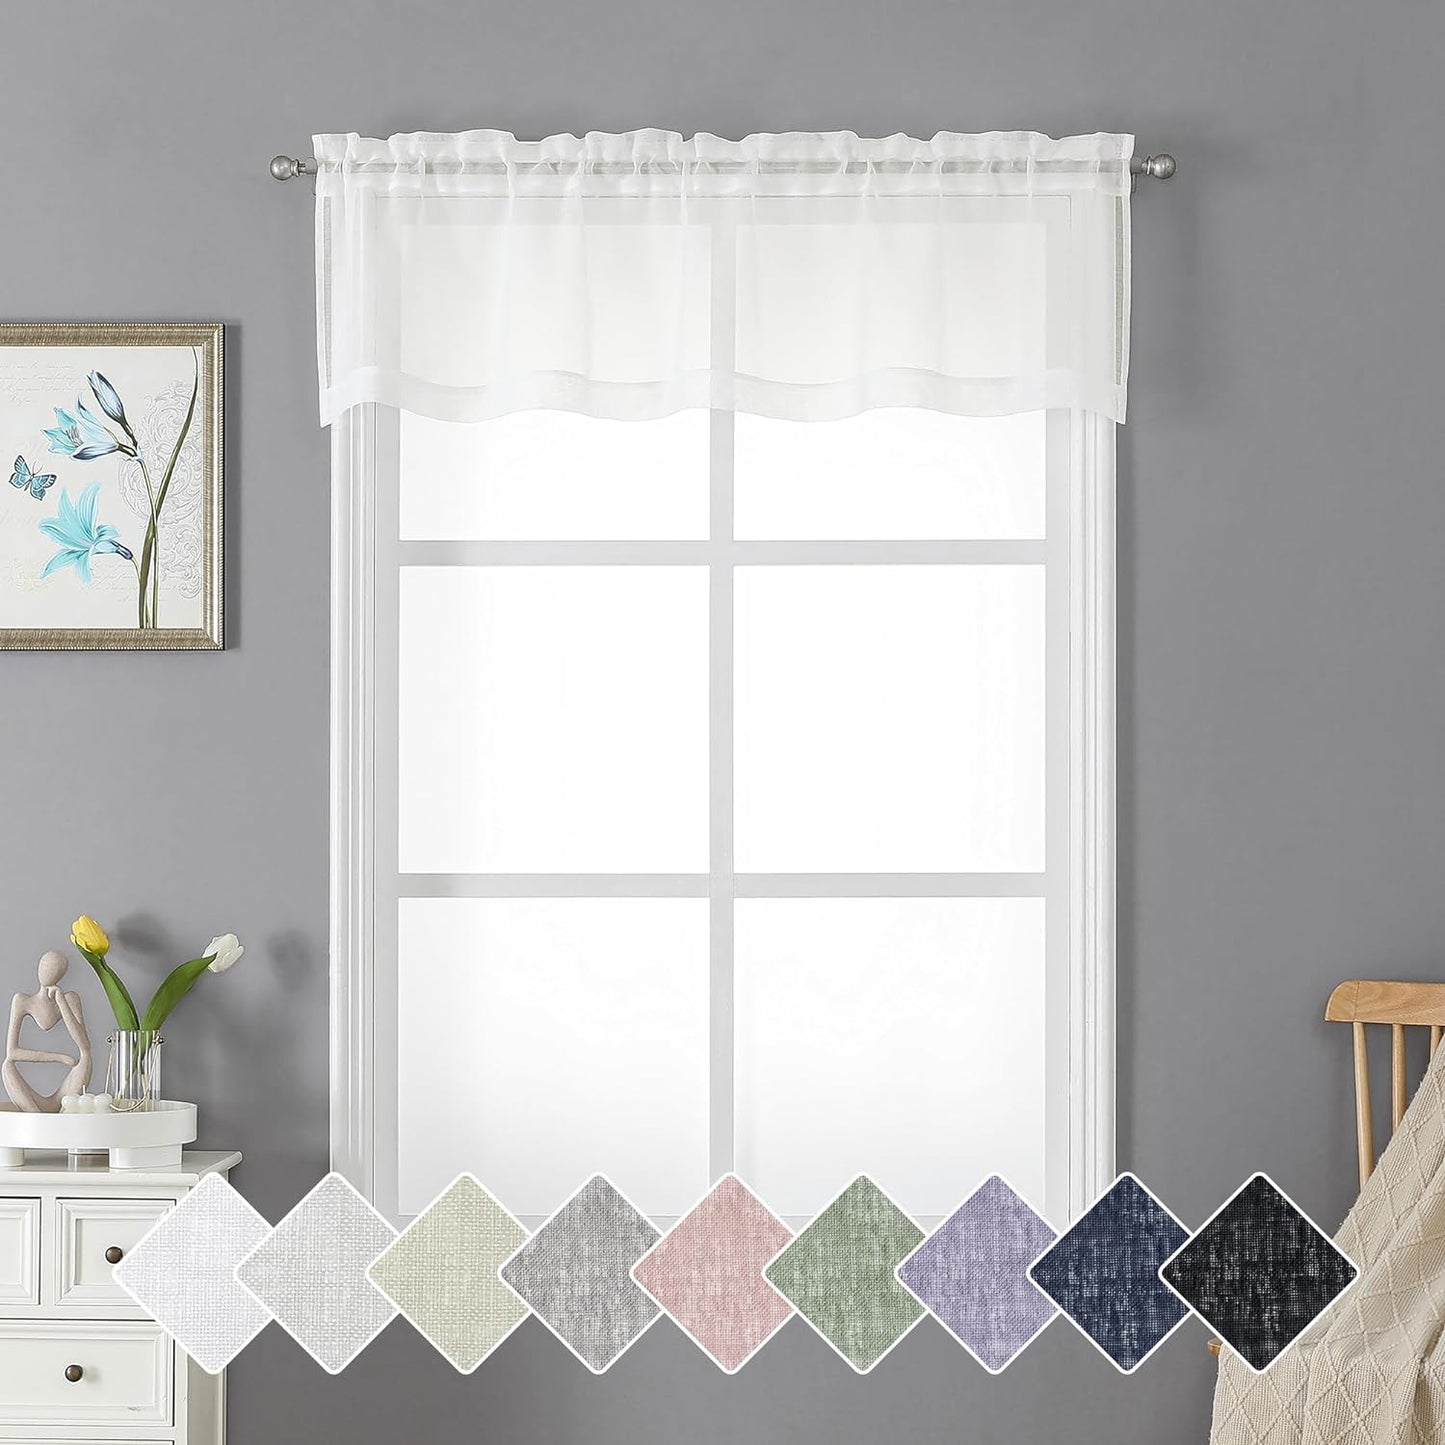 Lecloud Doris Faux Linen Sheer Grey Valance Curtains 14 Inches Length, Cafe Kitchen Bedroom Living Room Gauzy Silver Grey Curtain for Small Window, Slub Light Gray Valance Dual Rod Pockets 60X14 Inch  Lecloud Ivory 60 W X 14 L 